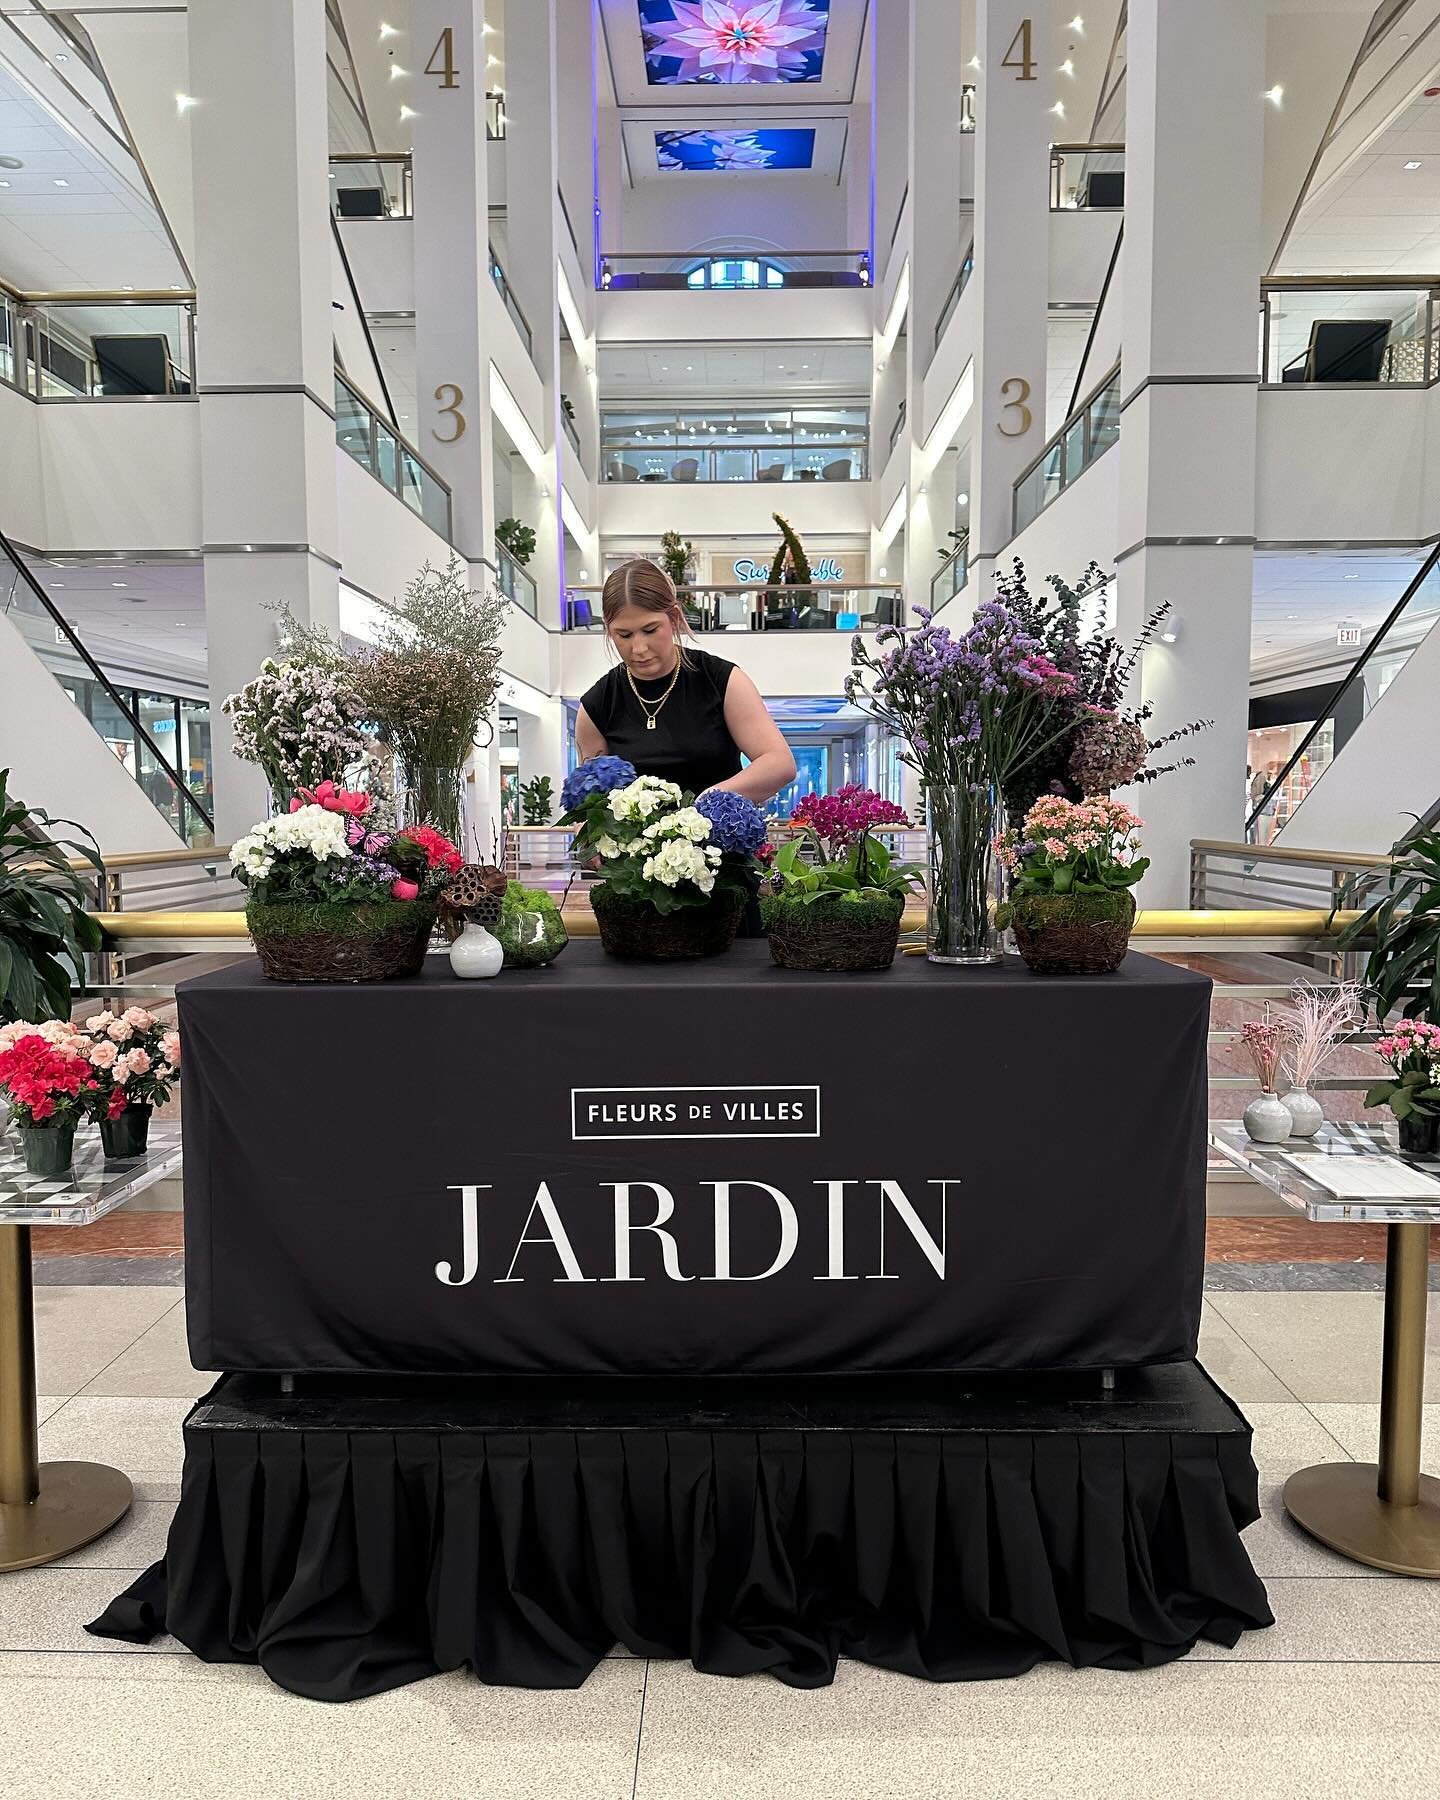 If you're downtown the next few days, stop by one of our workshops @900shops for the @fleursdevilles show Artiste. 11 and 1, F-Sun. There are so many talented florists here, this is really a treat.

#flowers #workshops #buildabasket #freeworkshop #ch